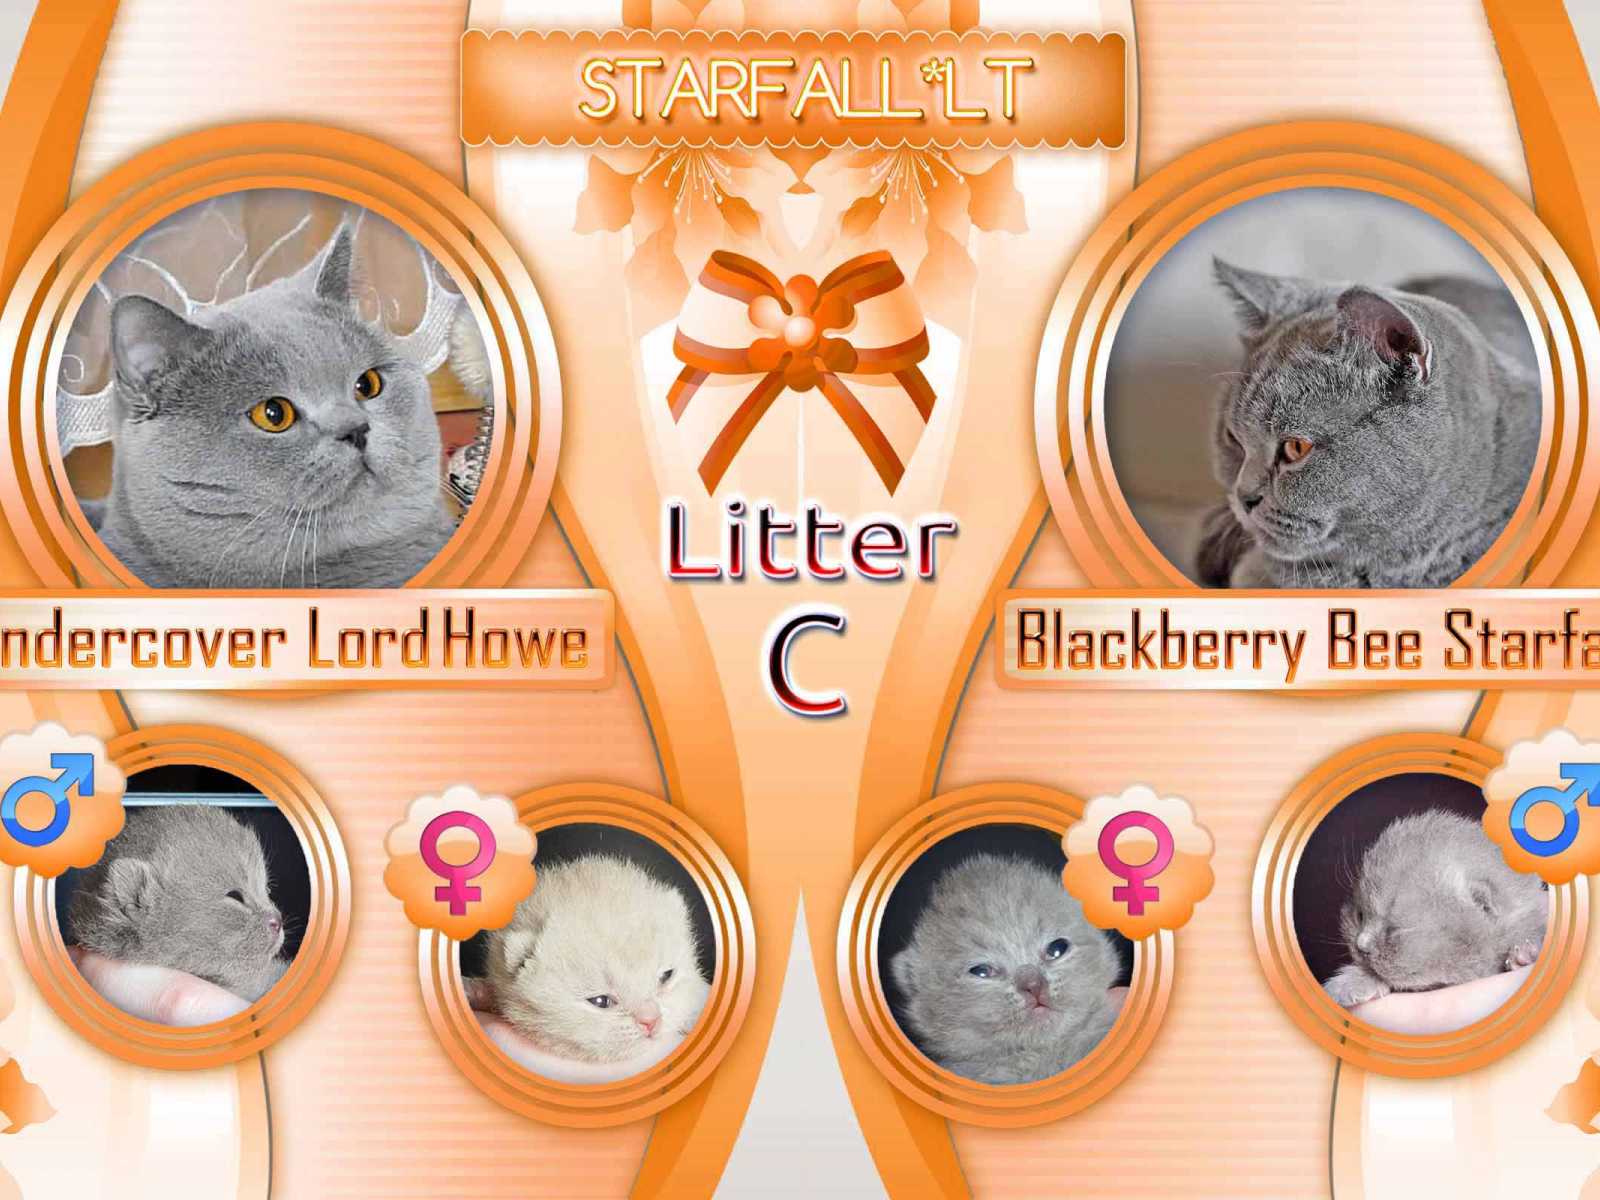 Litter C has been born! Blue and lilac kittens